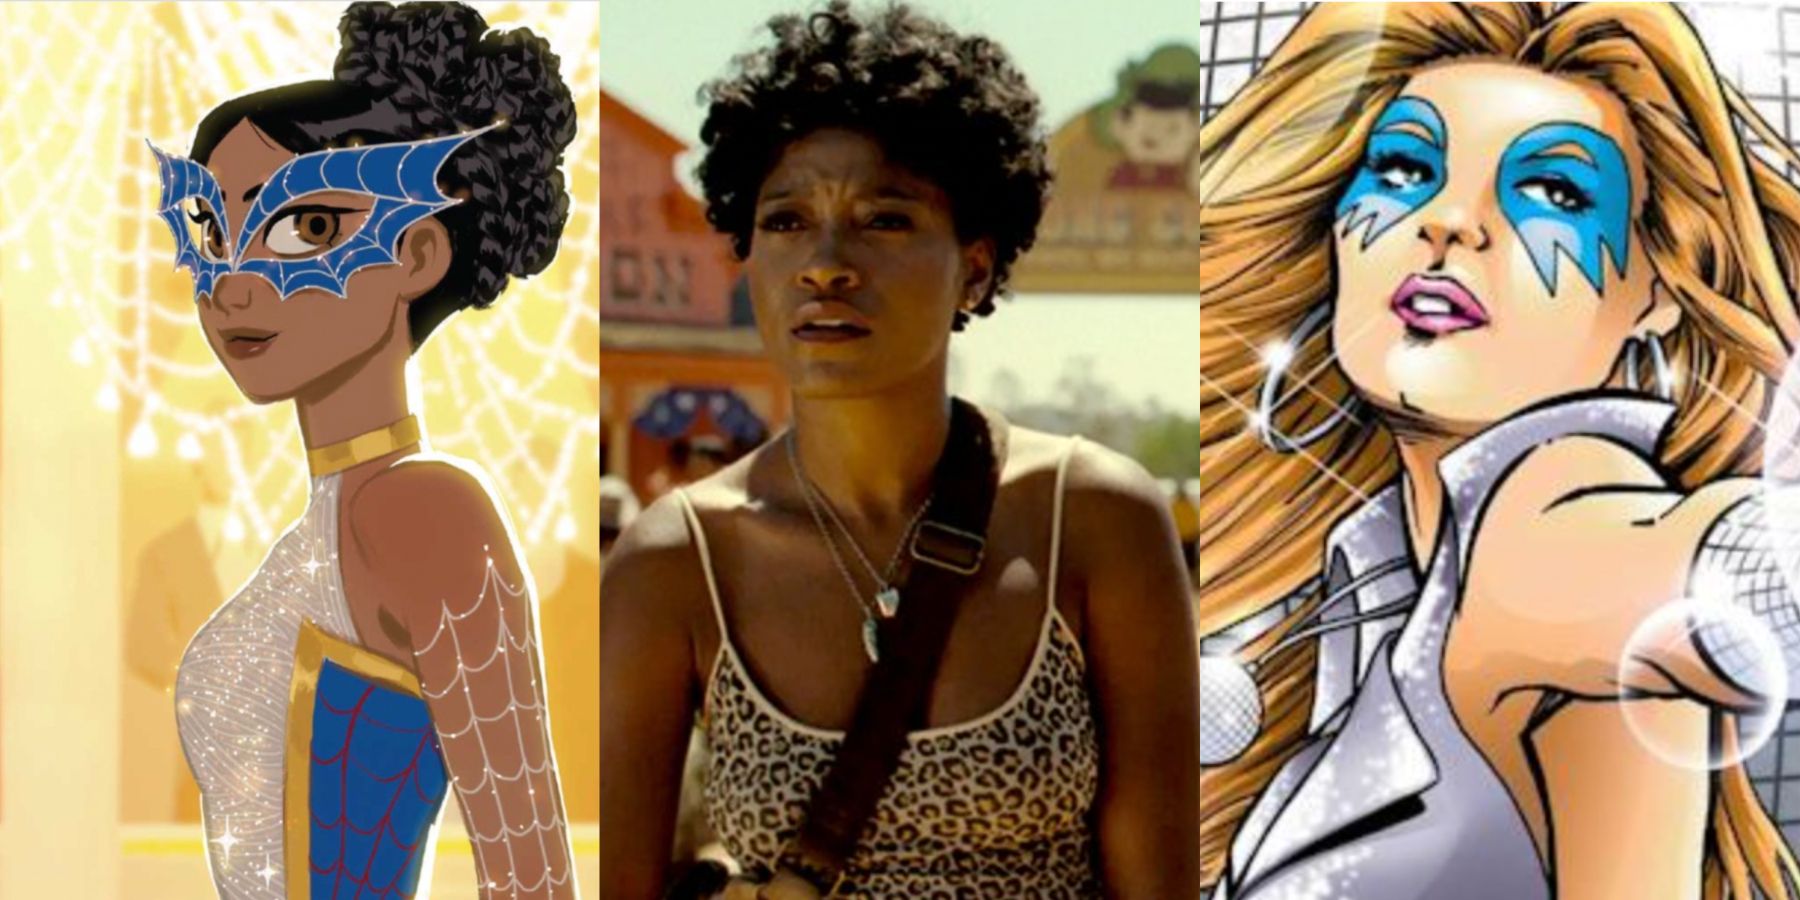 A split image features Spinstress in Marvel comics, Keke Palmer in NOPE, and Dazzler in Marvel comics